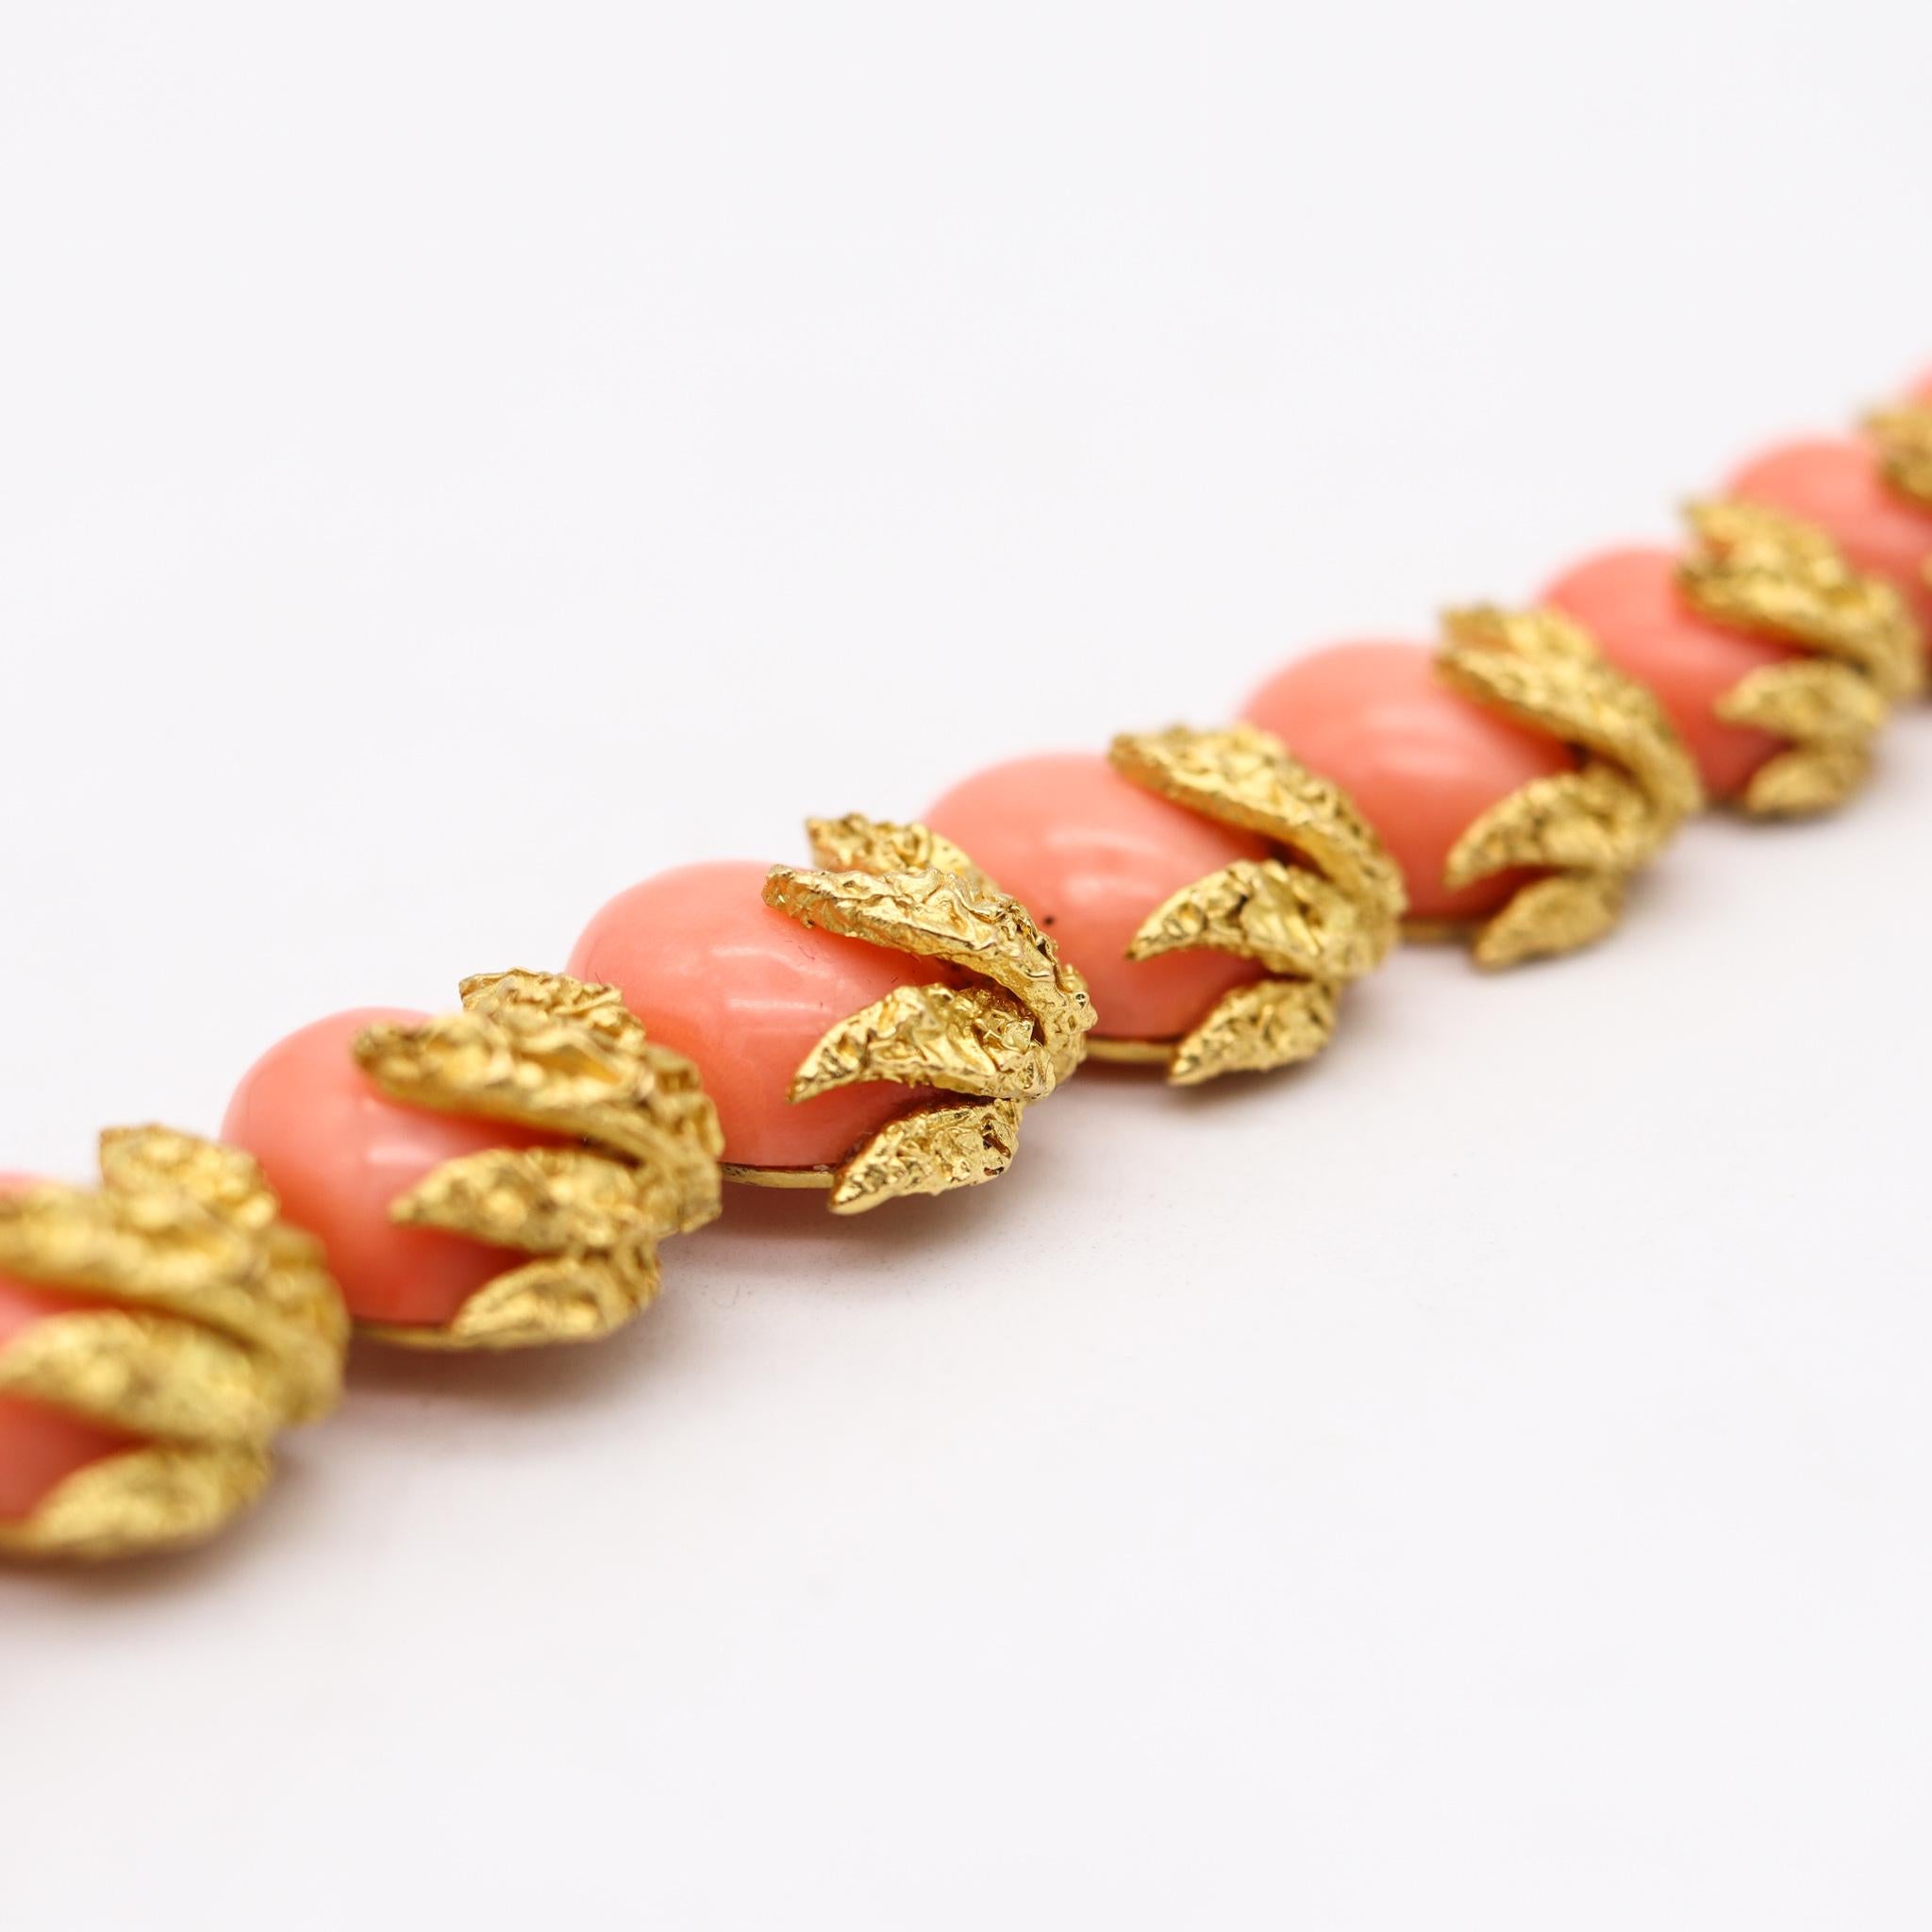 Cabochon Fred of Paris 1970 Bracelet in Textured 18kt Yellow Gold with Graduated Corals